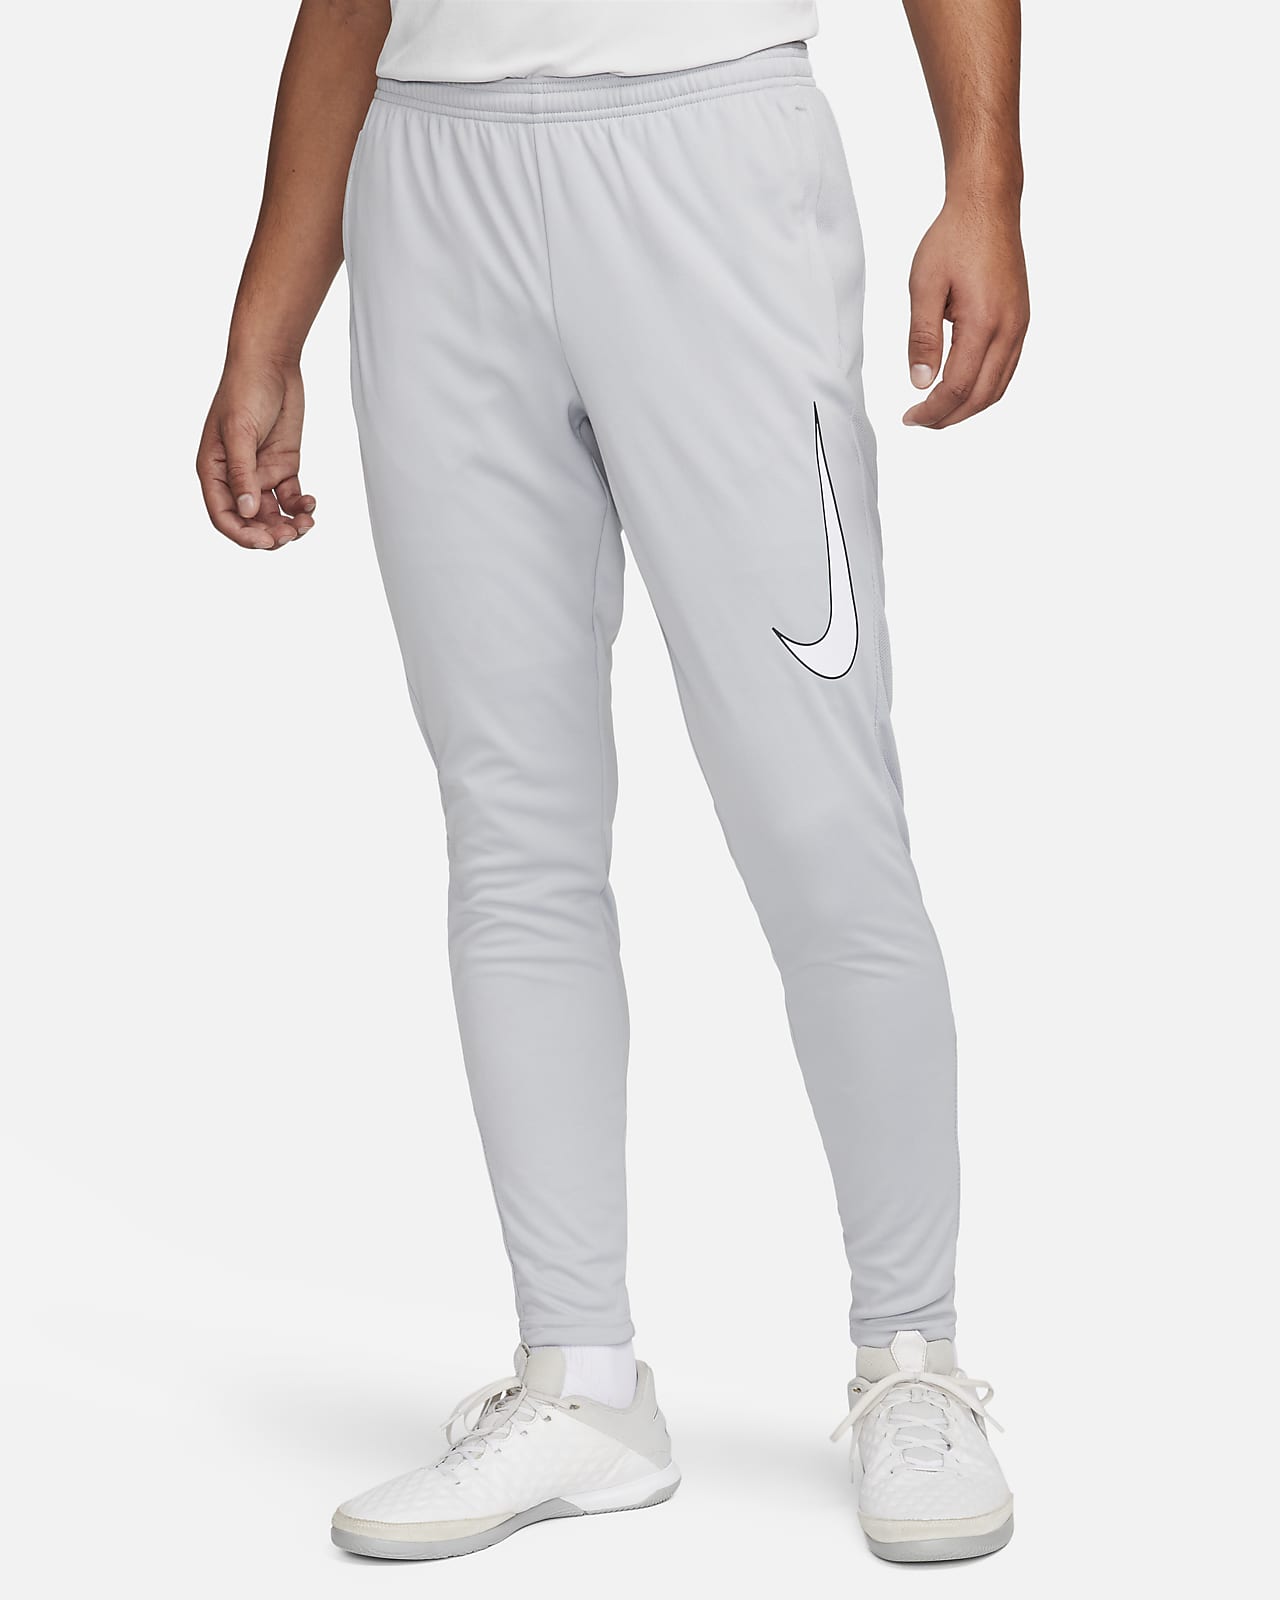 Nike Dri FIT Academy Mens Zippered Soccer Pants Silver, £29.00